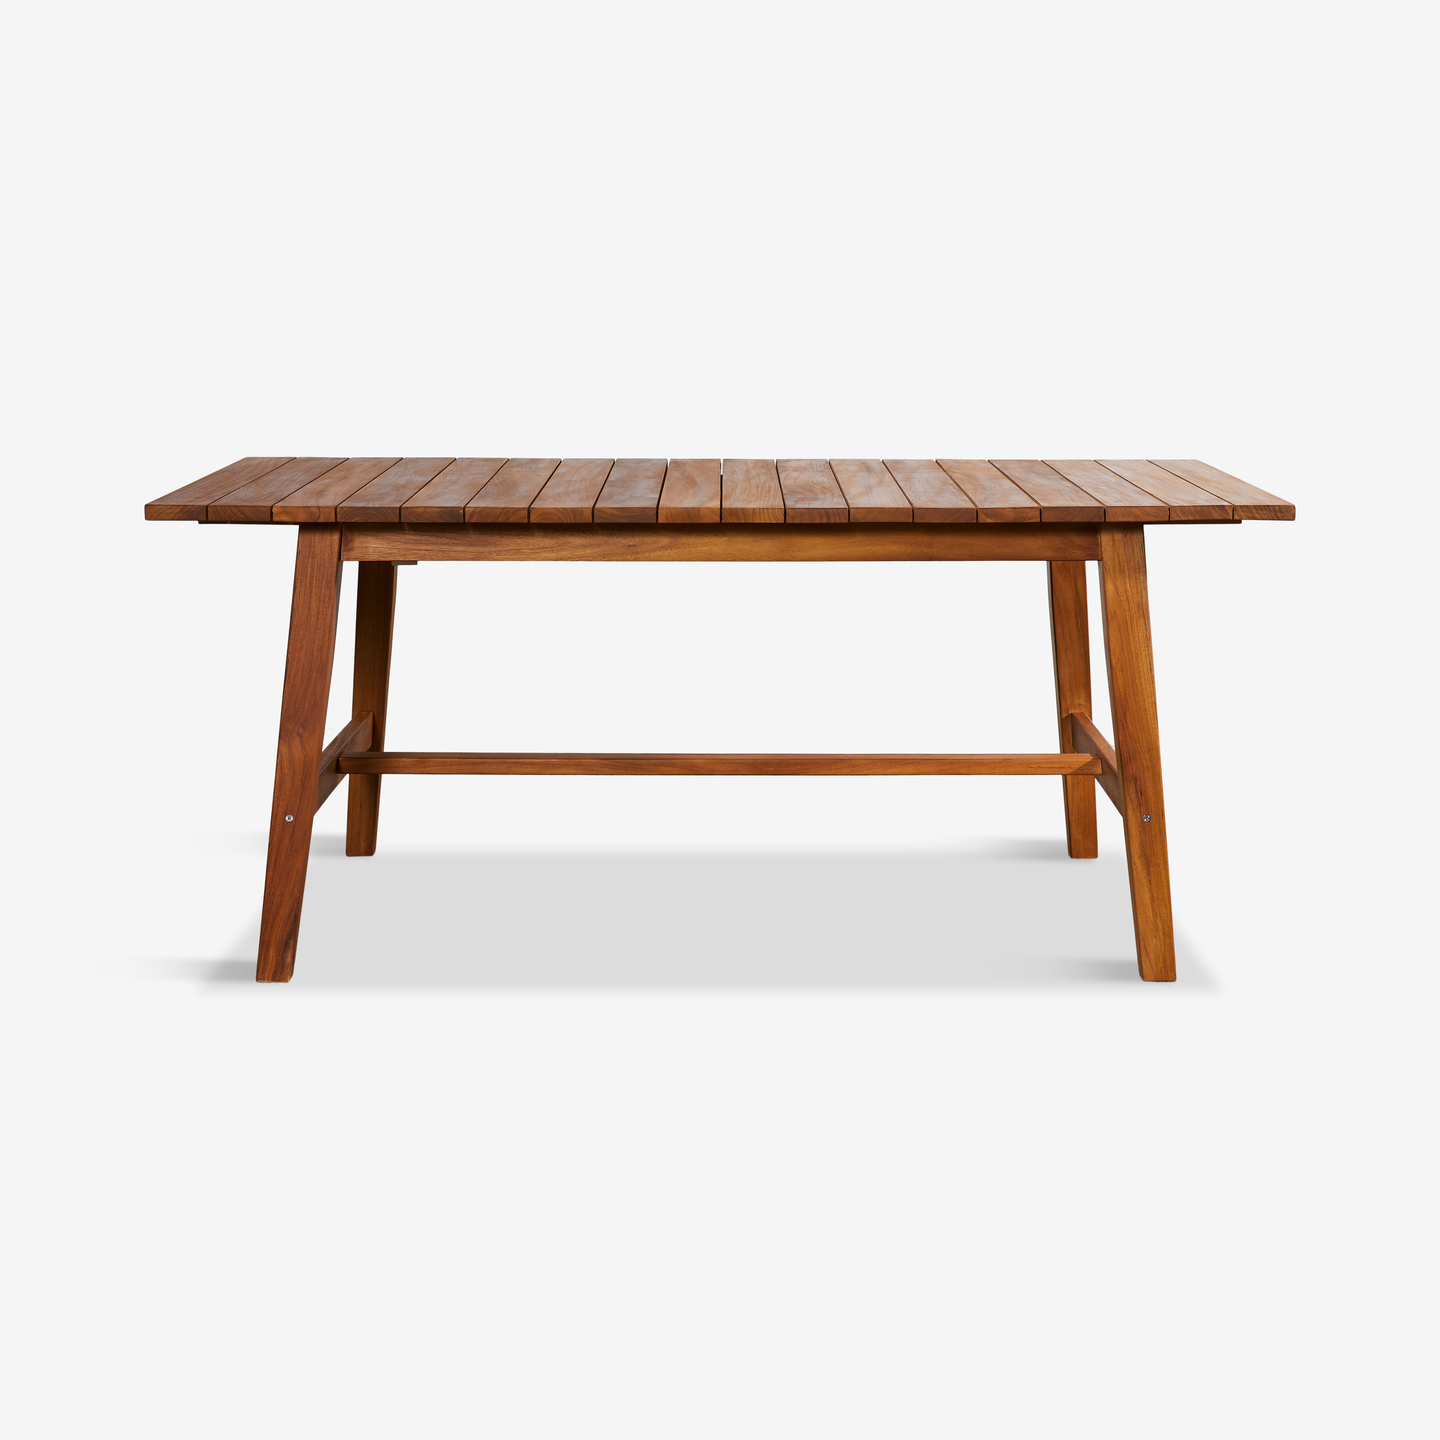 144_Joudi-Patio-Dining-Table_Flat-Front 2020